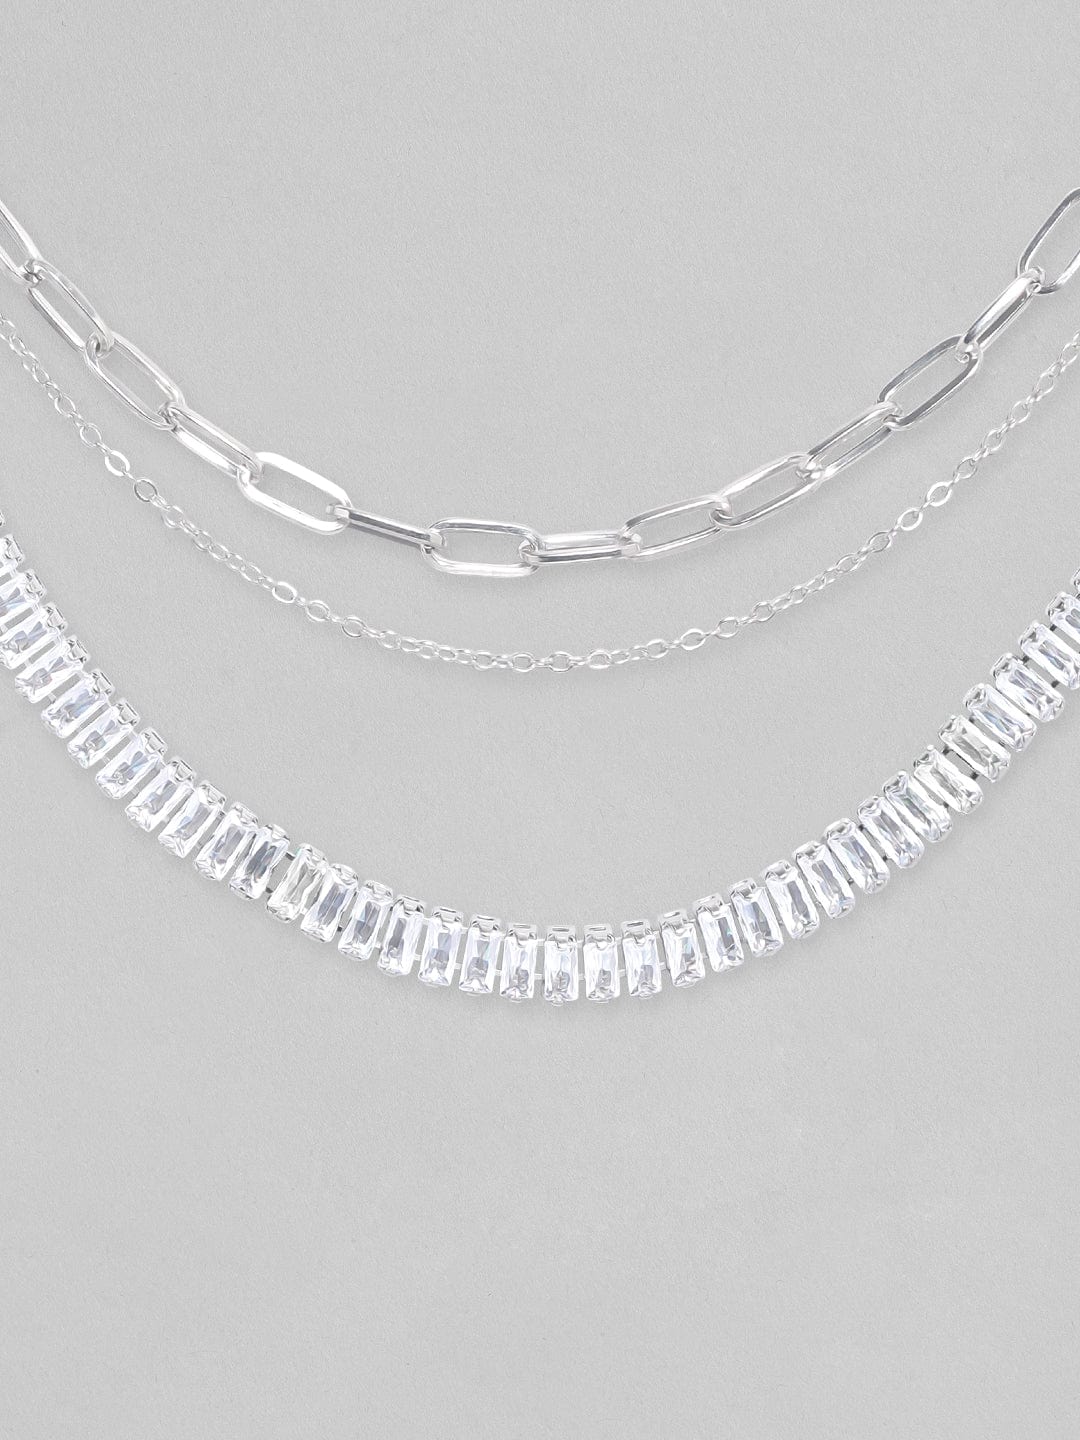 Rubans Voguish Silver Toned With Baguette And Round Zircon Stones Studded Layered Necklace. Chain & Necklaces